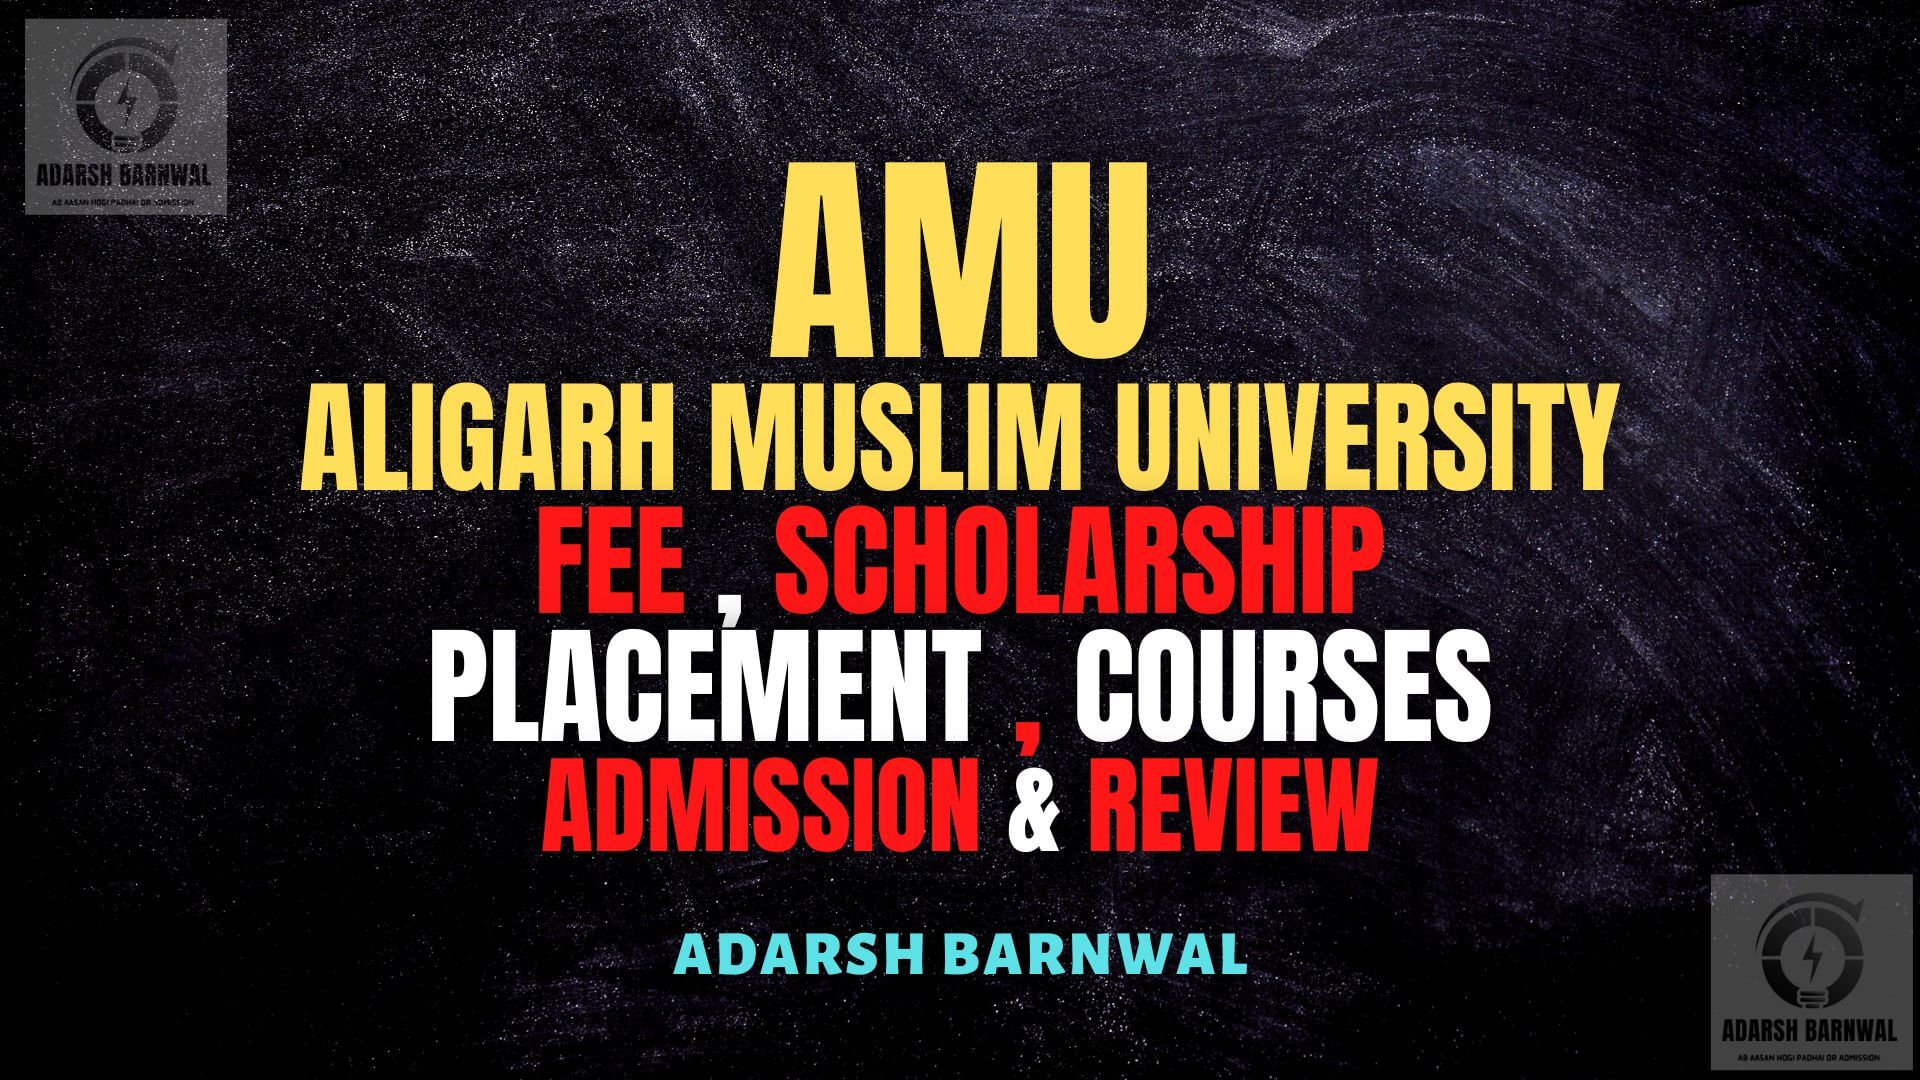 Aligarh Muslim University : AMU Fees, Cutoff, Courses, Ranking, Placement , Admission 2023-2024 by Adarsh barnwal